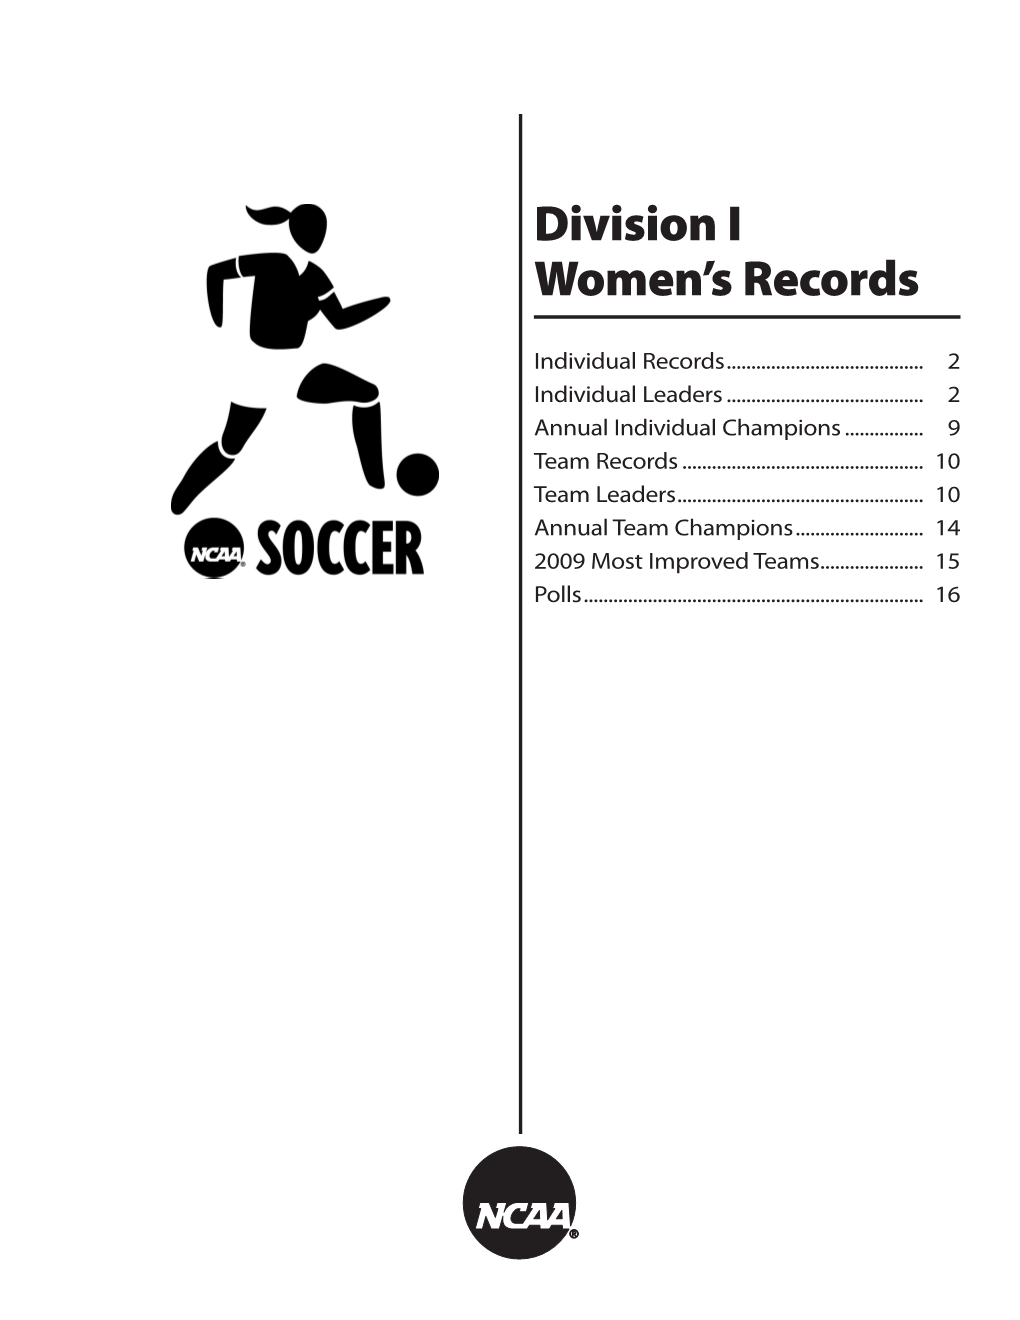 Division I Women's Records